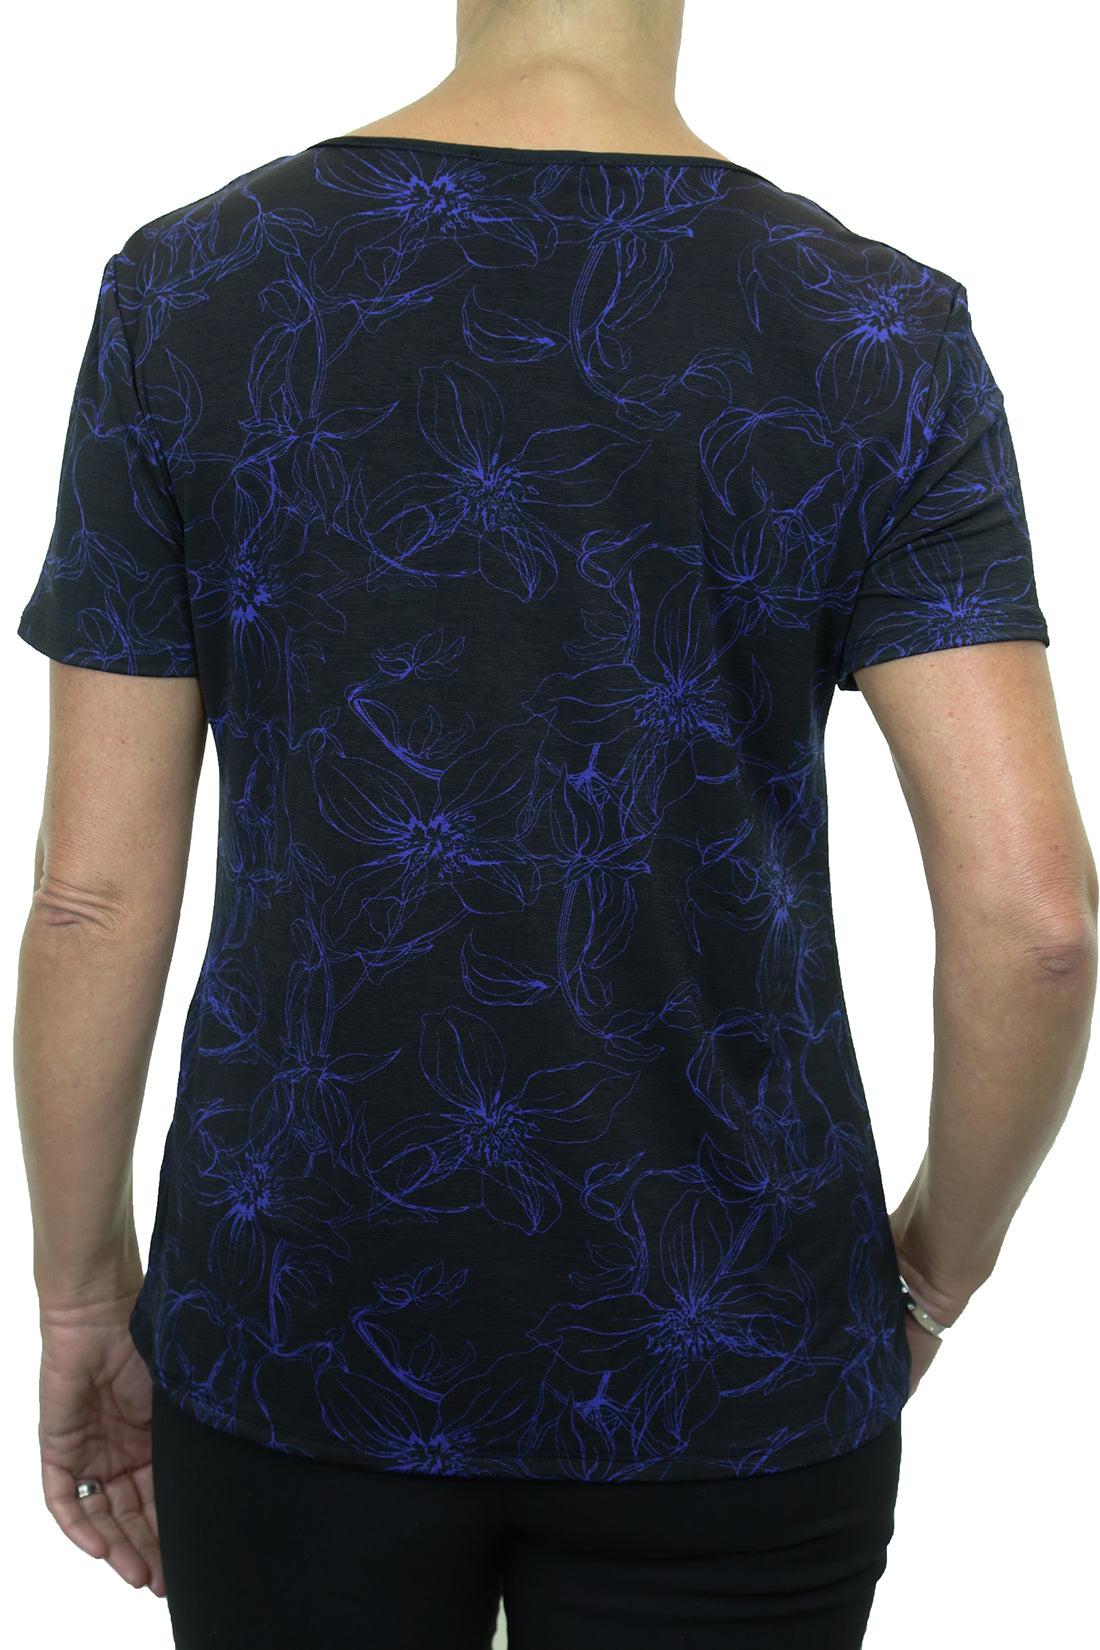 Floral Print Top Stretch With Sheen Black/Blue